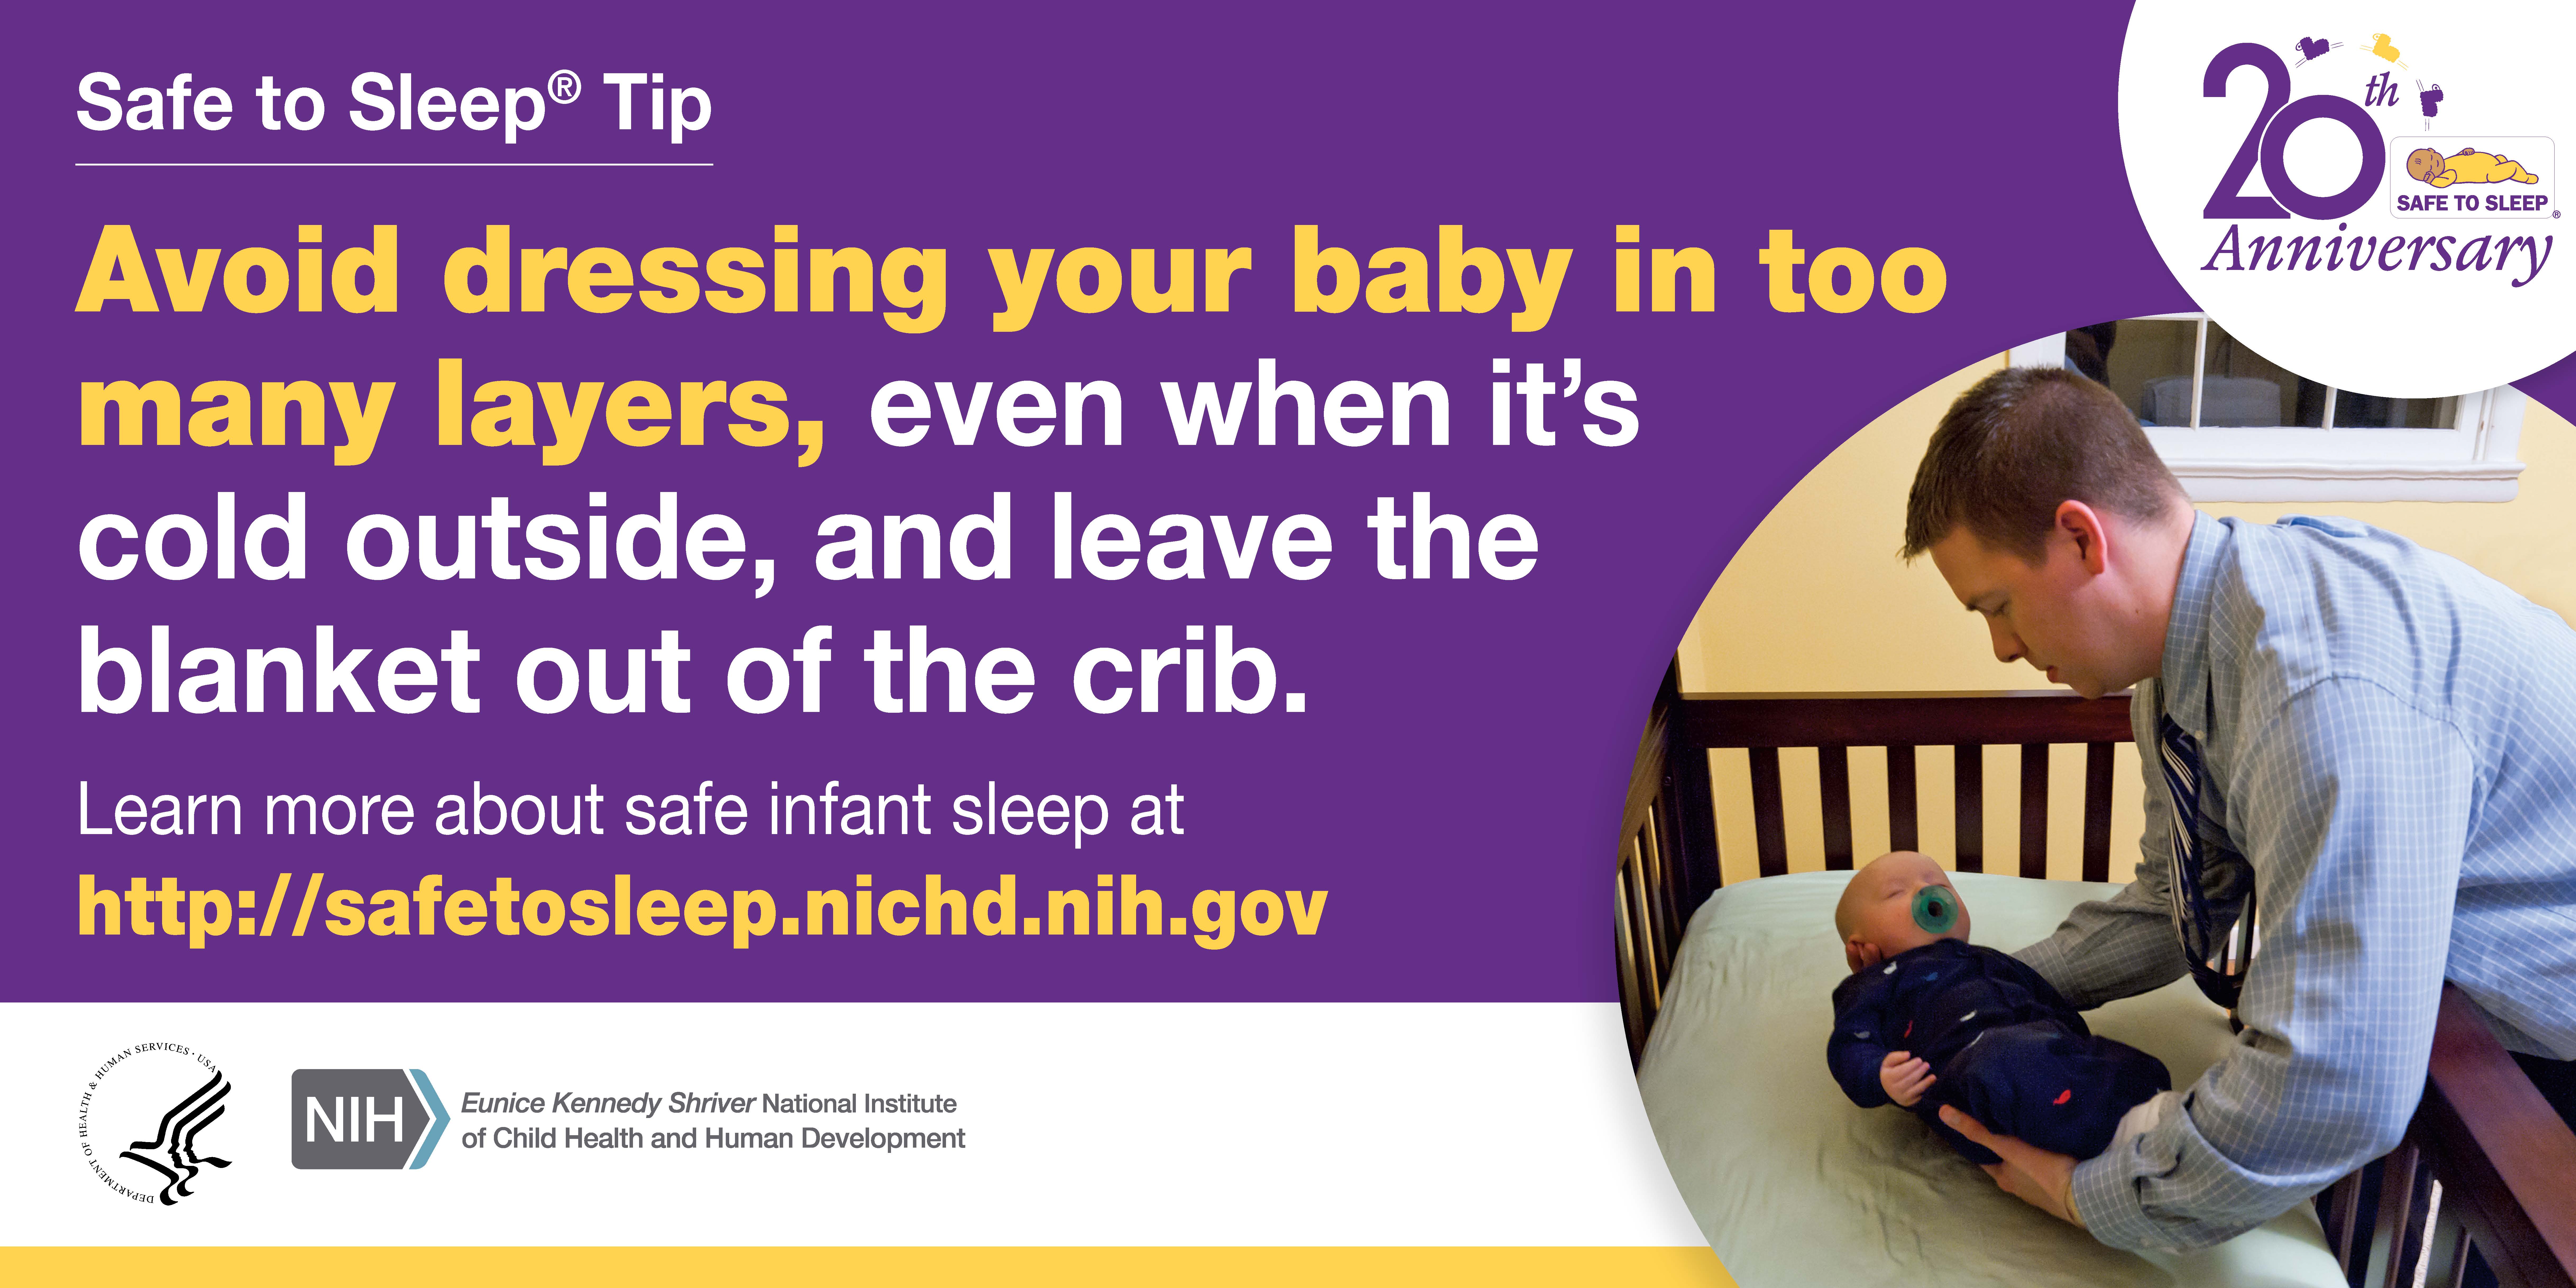 Avoid dressing your baby in too many layers, even when it's cold outside, and leave the blanket out of the crib.